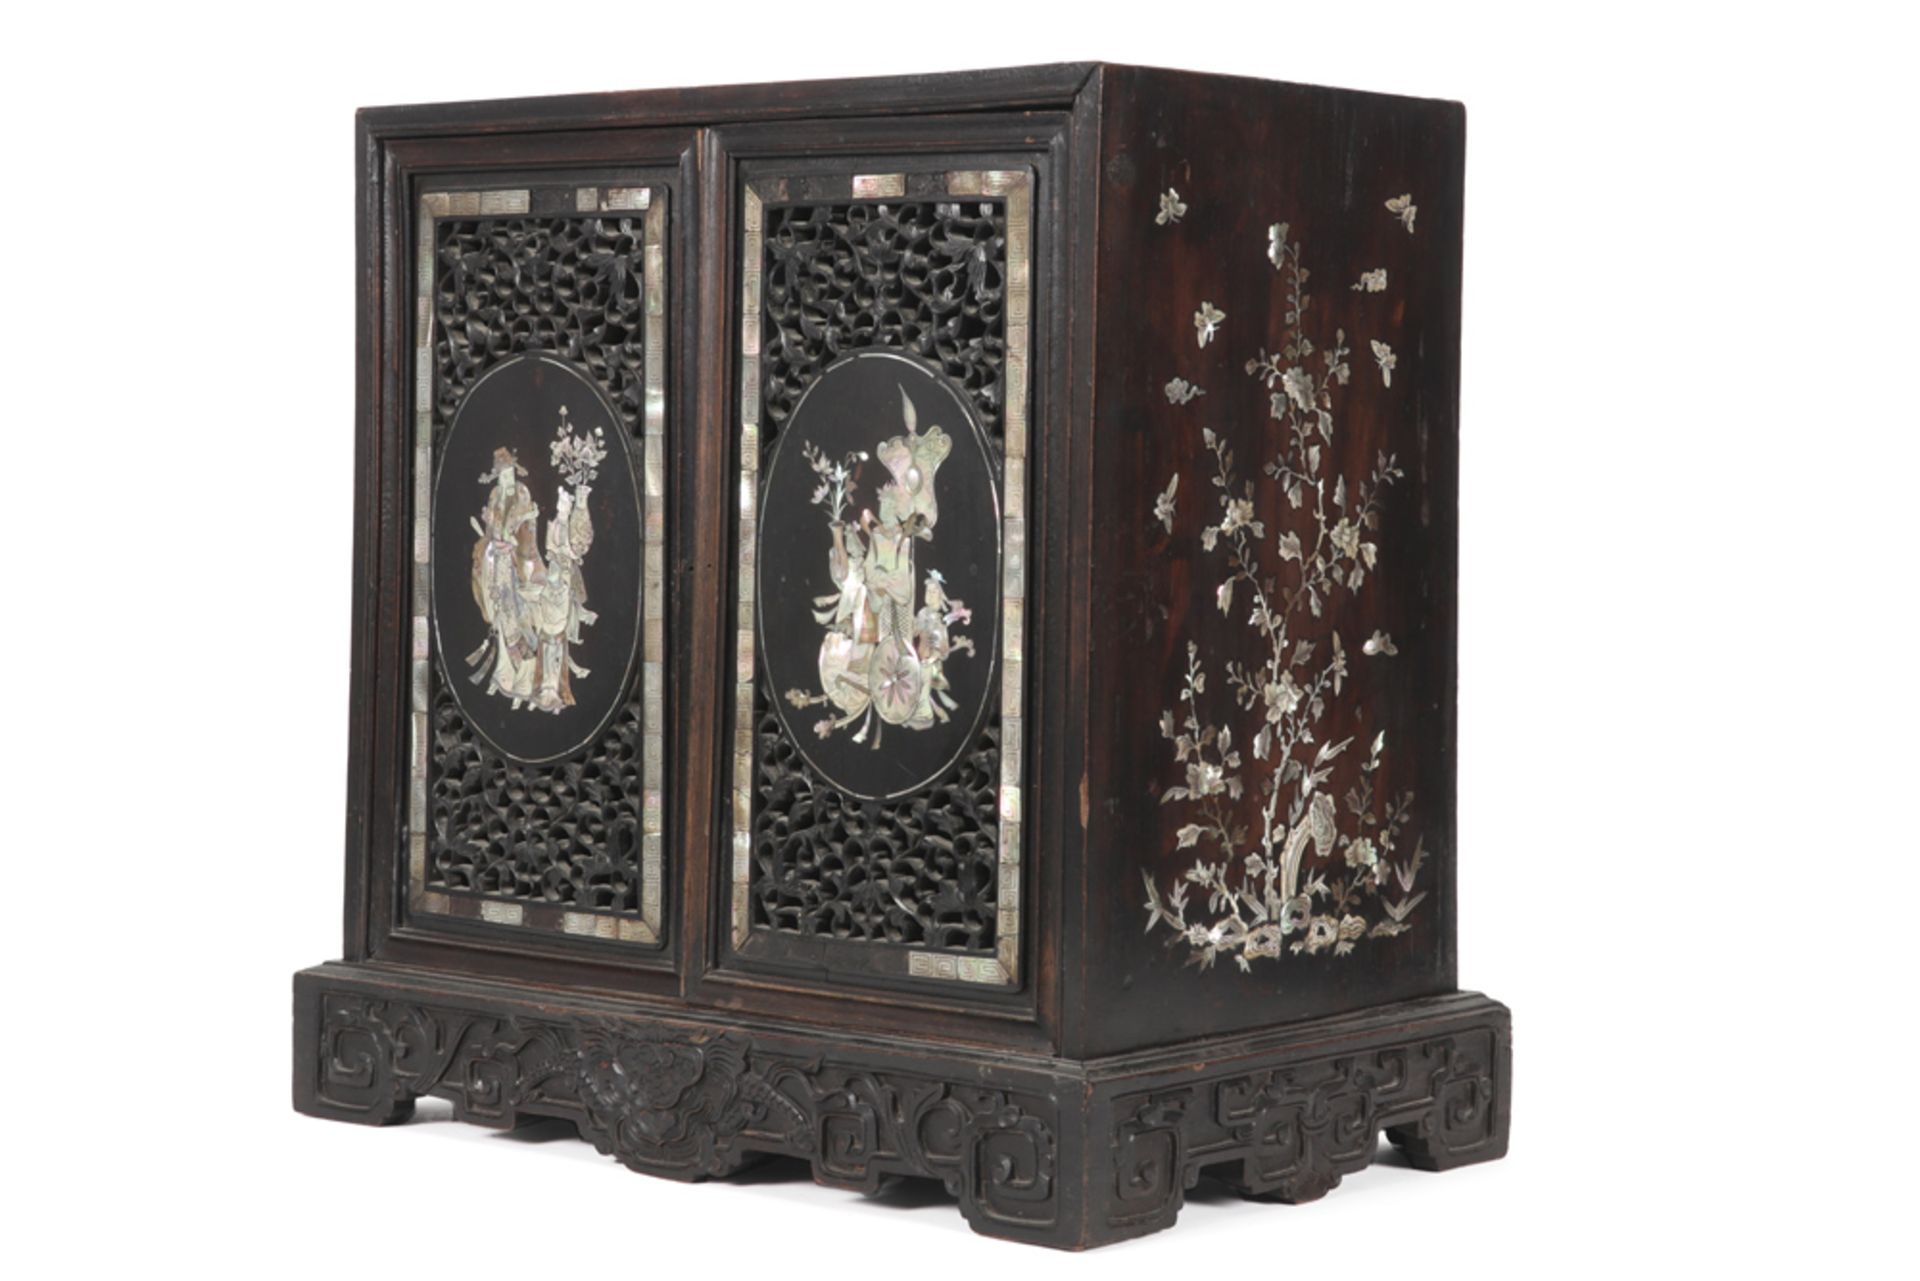 small antique Sino-Vietnamese cabinet with mother pearl inlay || Antiek Sino-Vietnamees kabinetje - Image 3 of 5